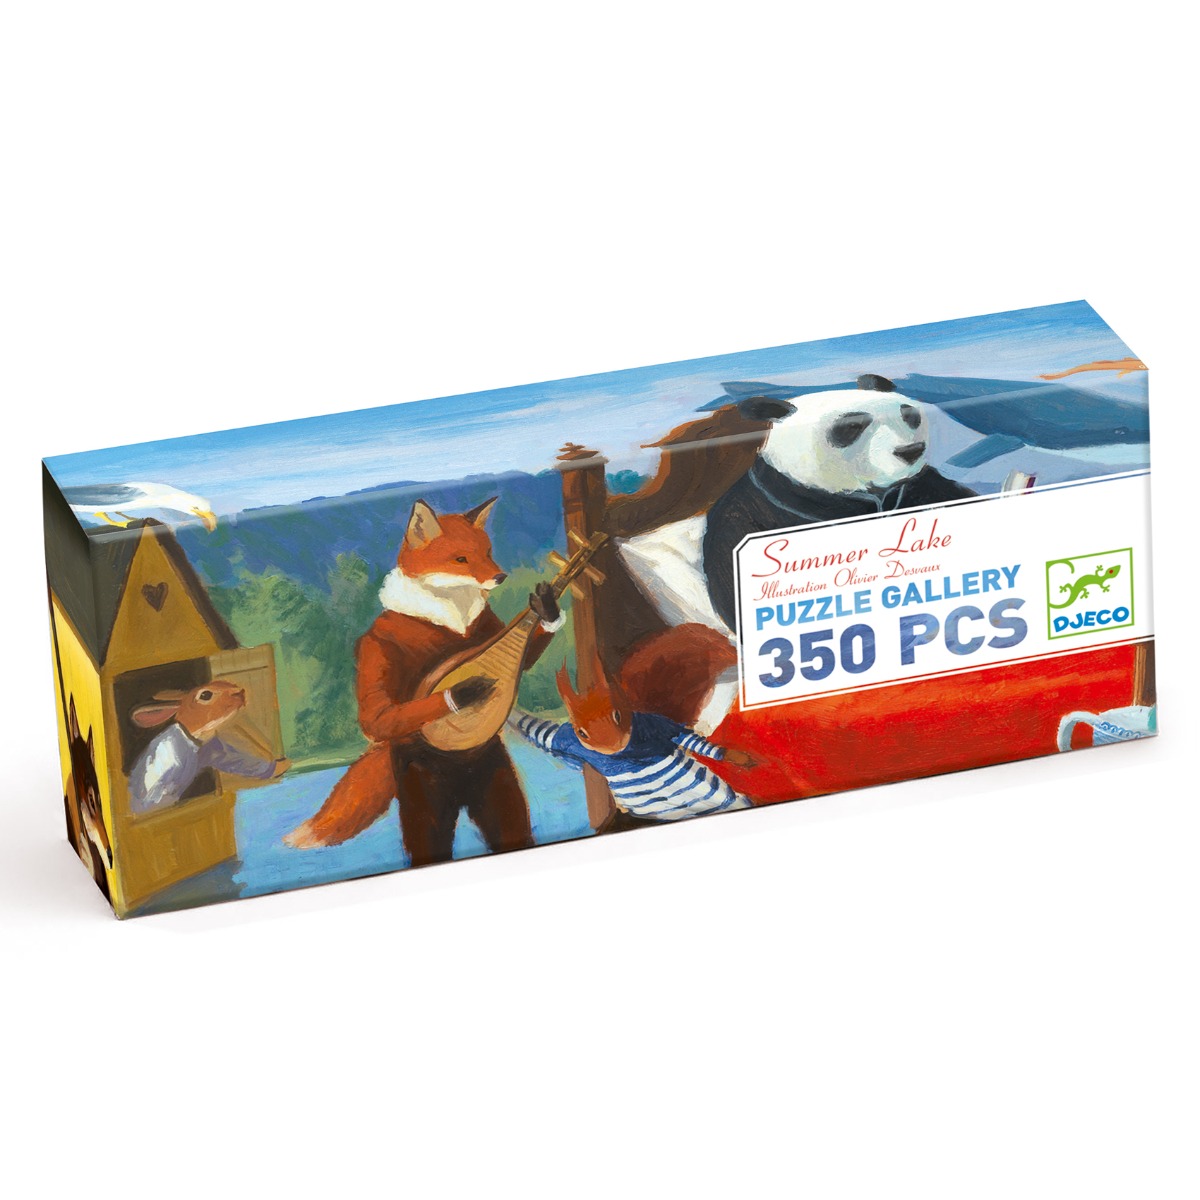 Summer lake 350-piece puzzle (Age +7)